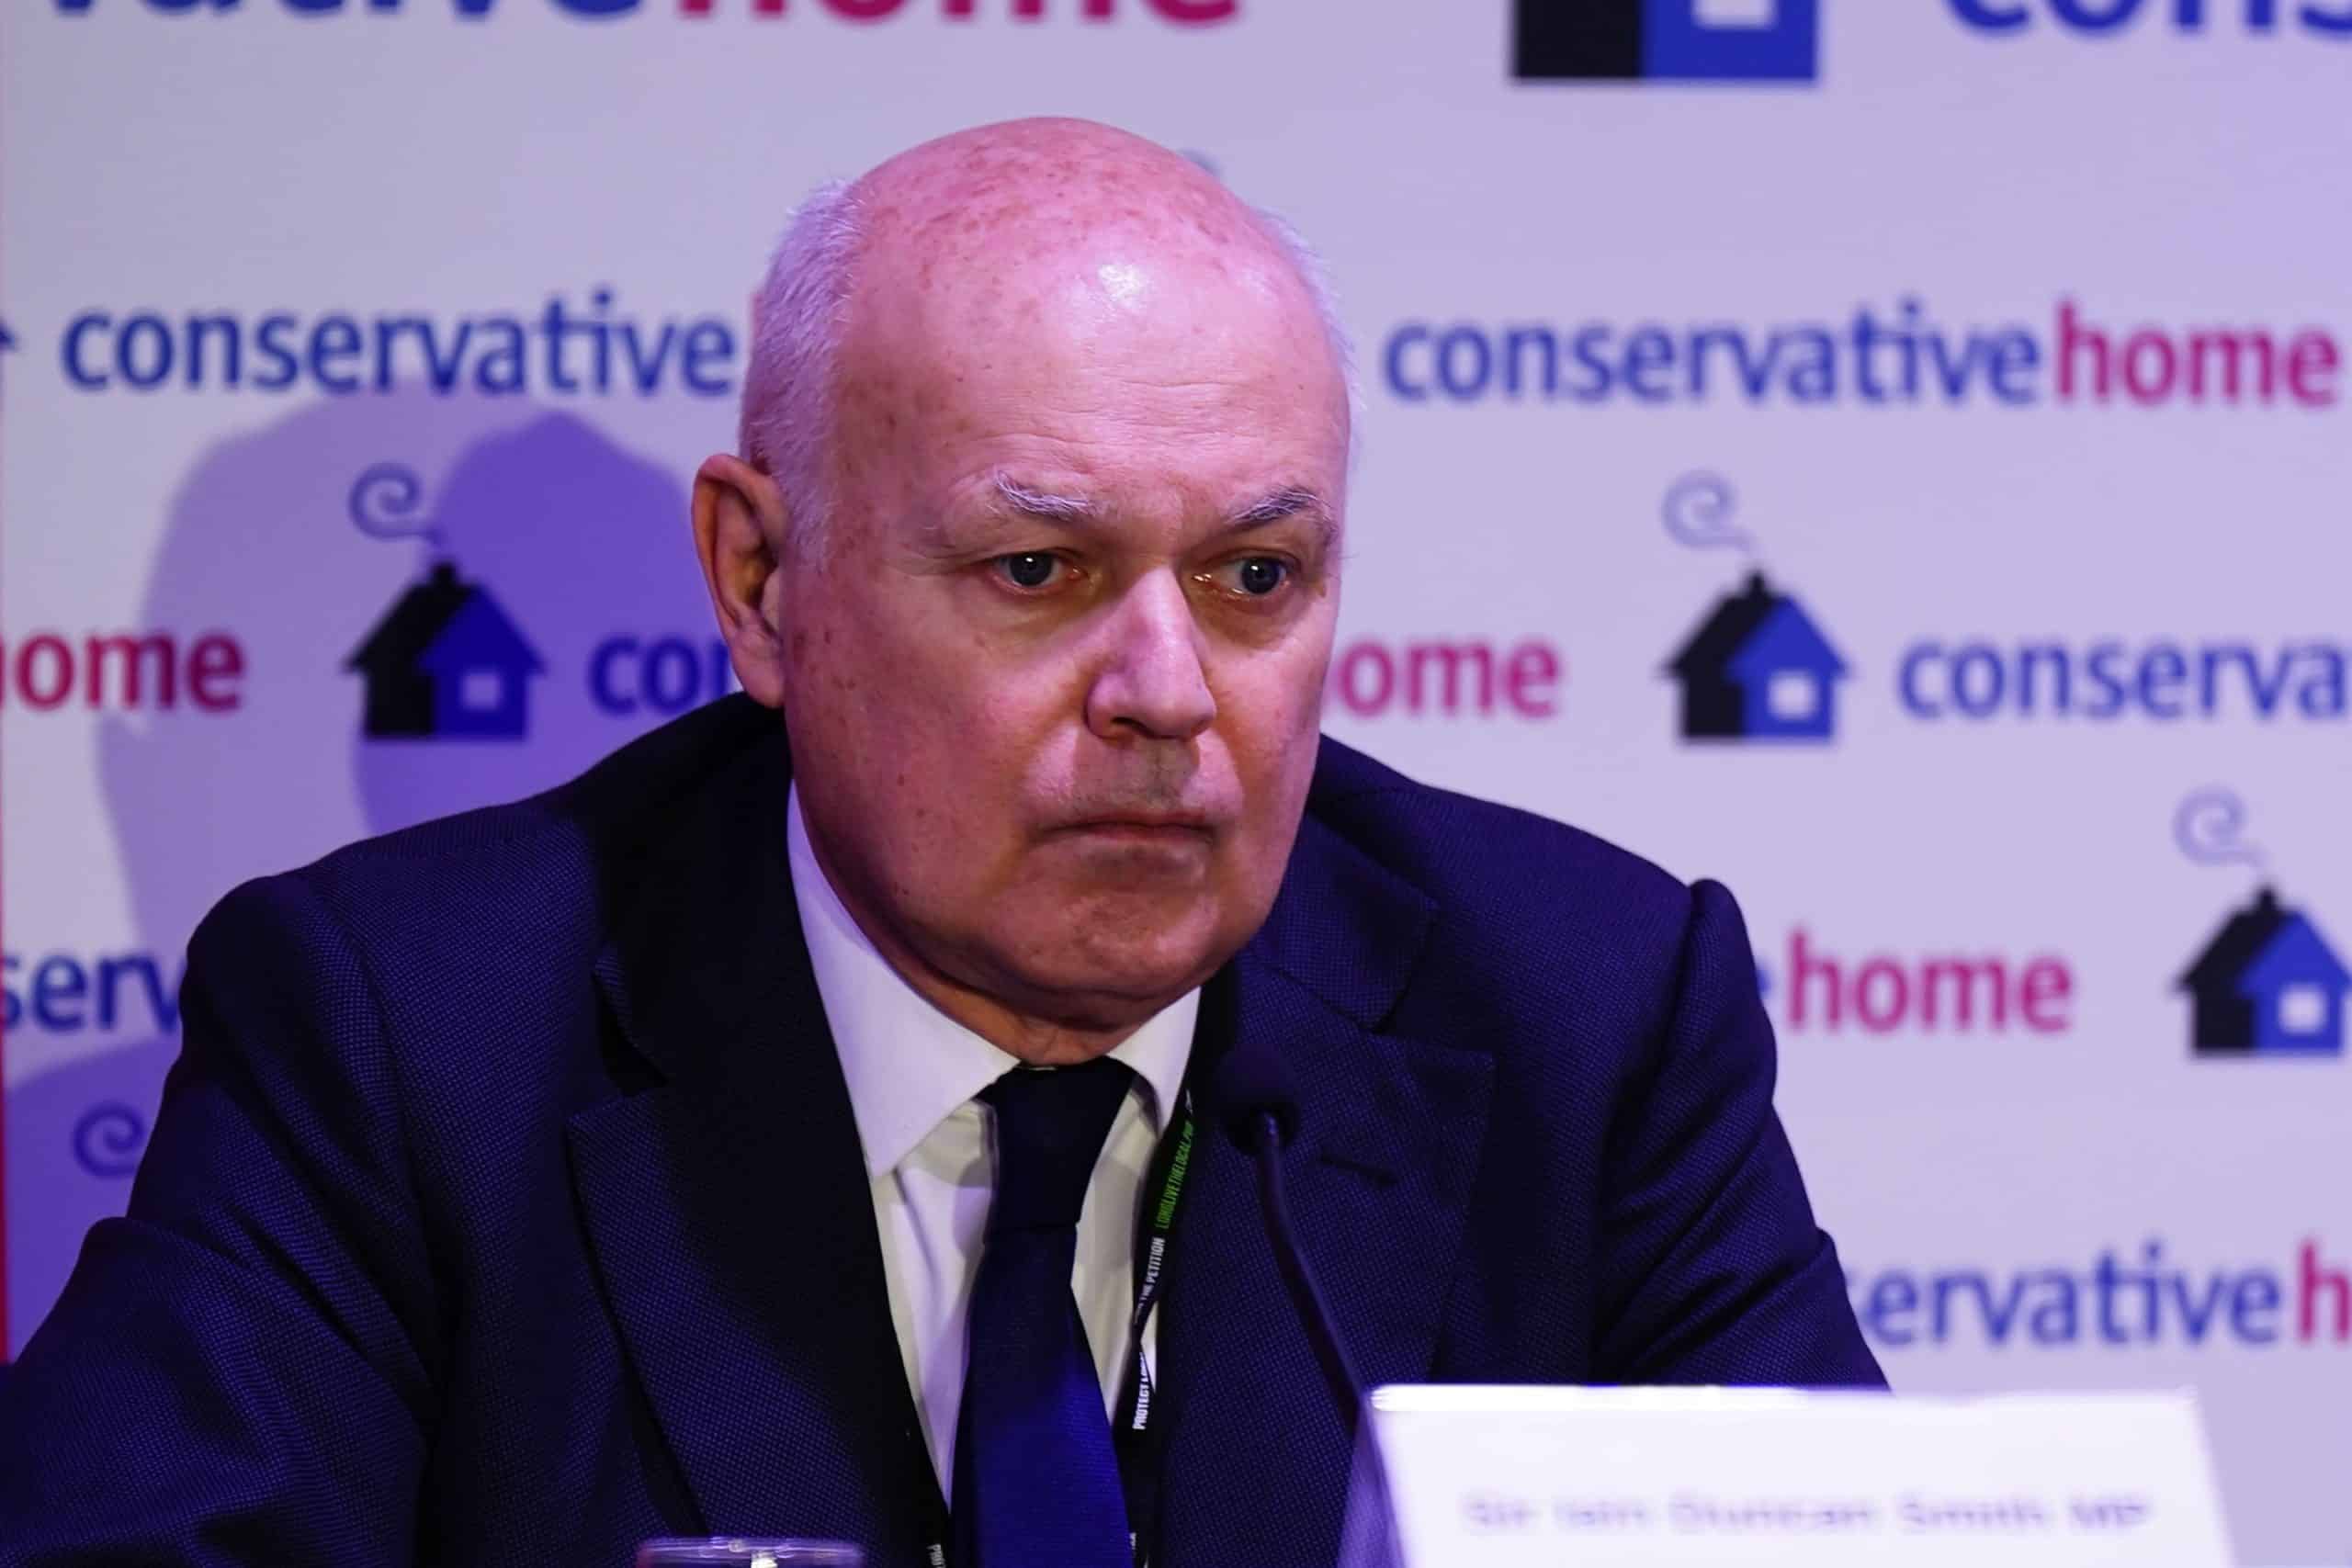 Benefit cuts don’t make sense if you want growth, says Iain Duncan Smith